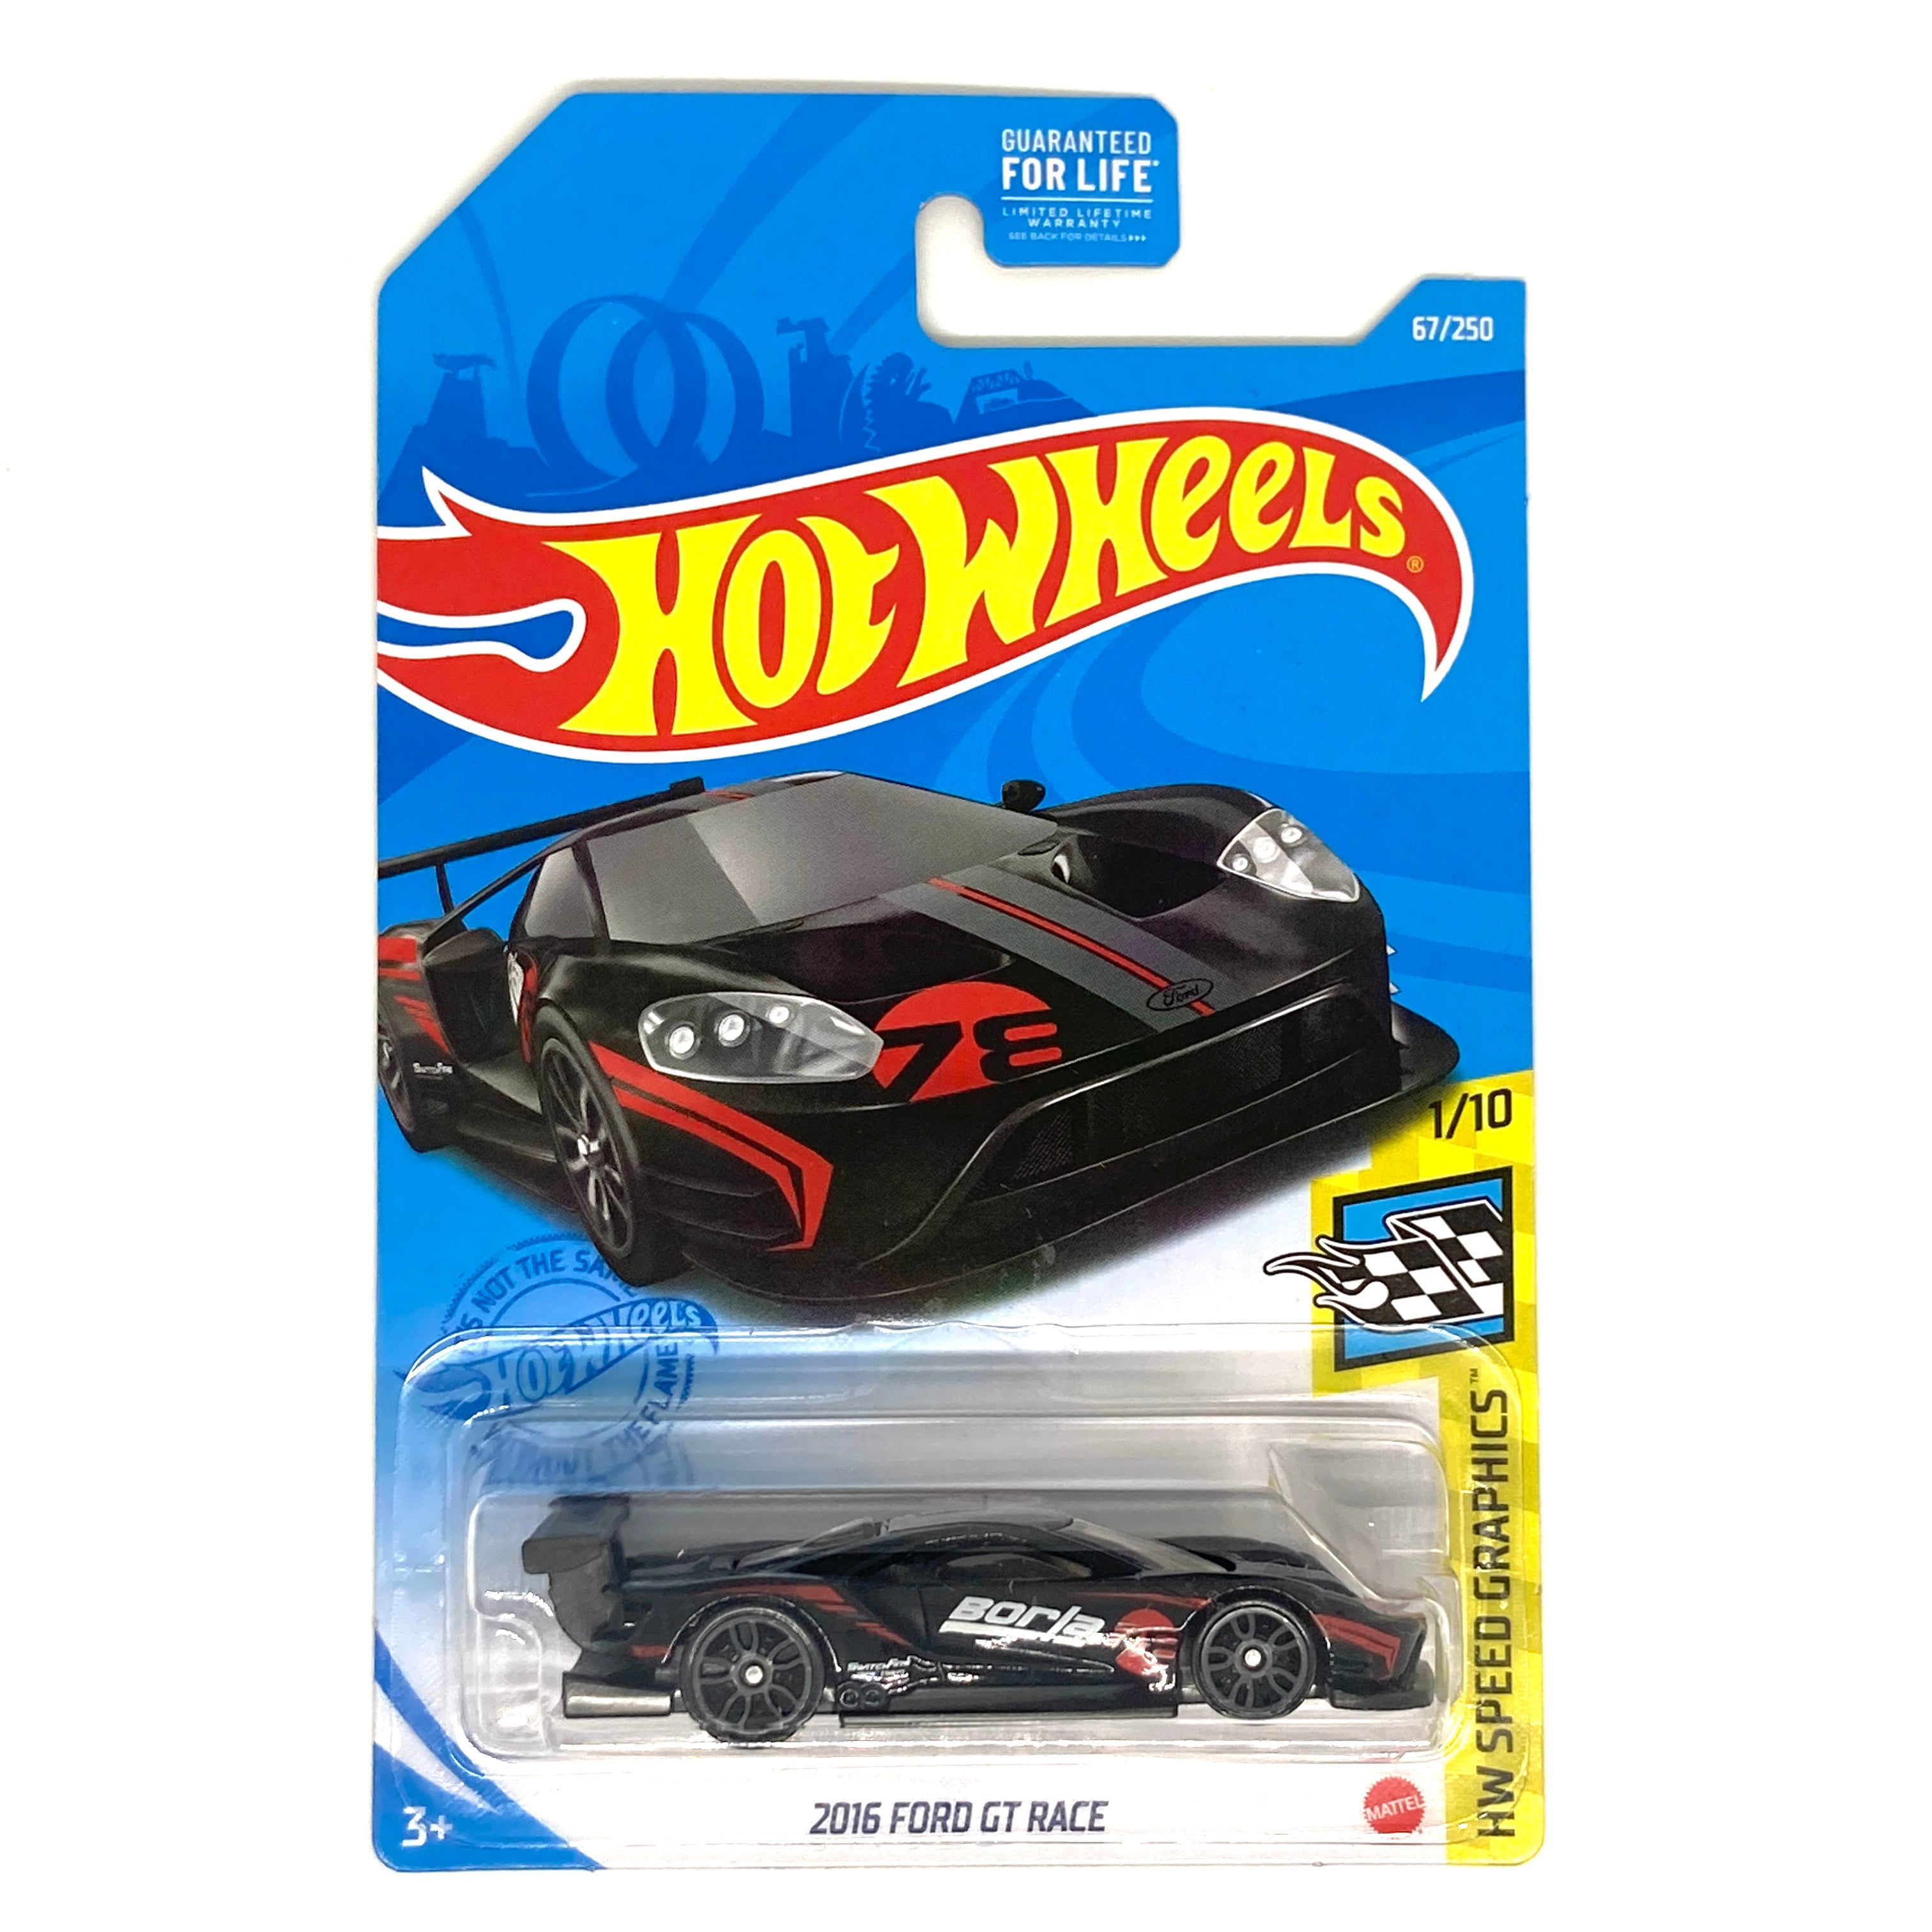 067/250 Hot Wheels 2016 Ford GT Race HW Speed Graphics 1/10 2021 Short Card 